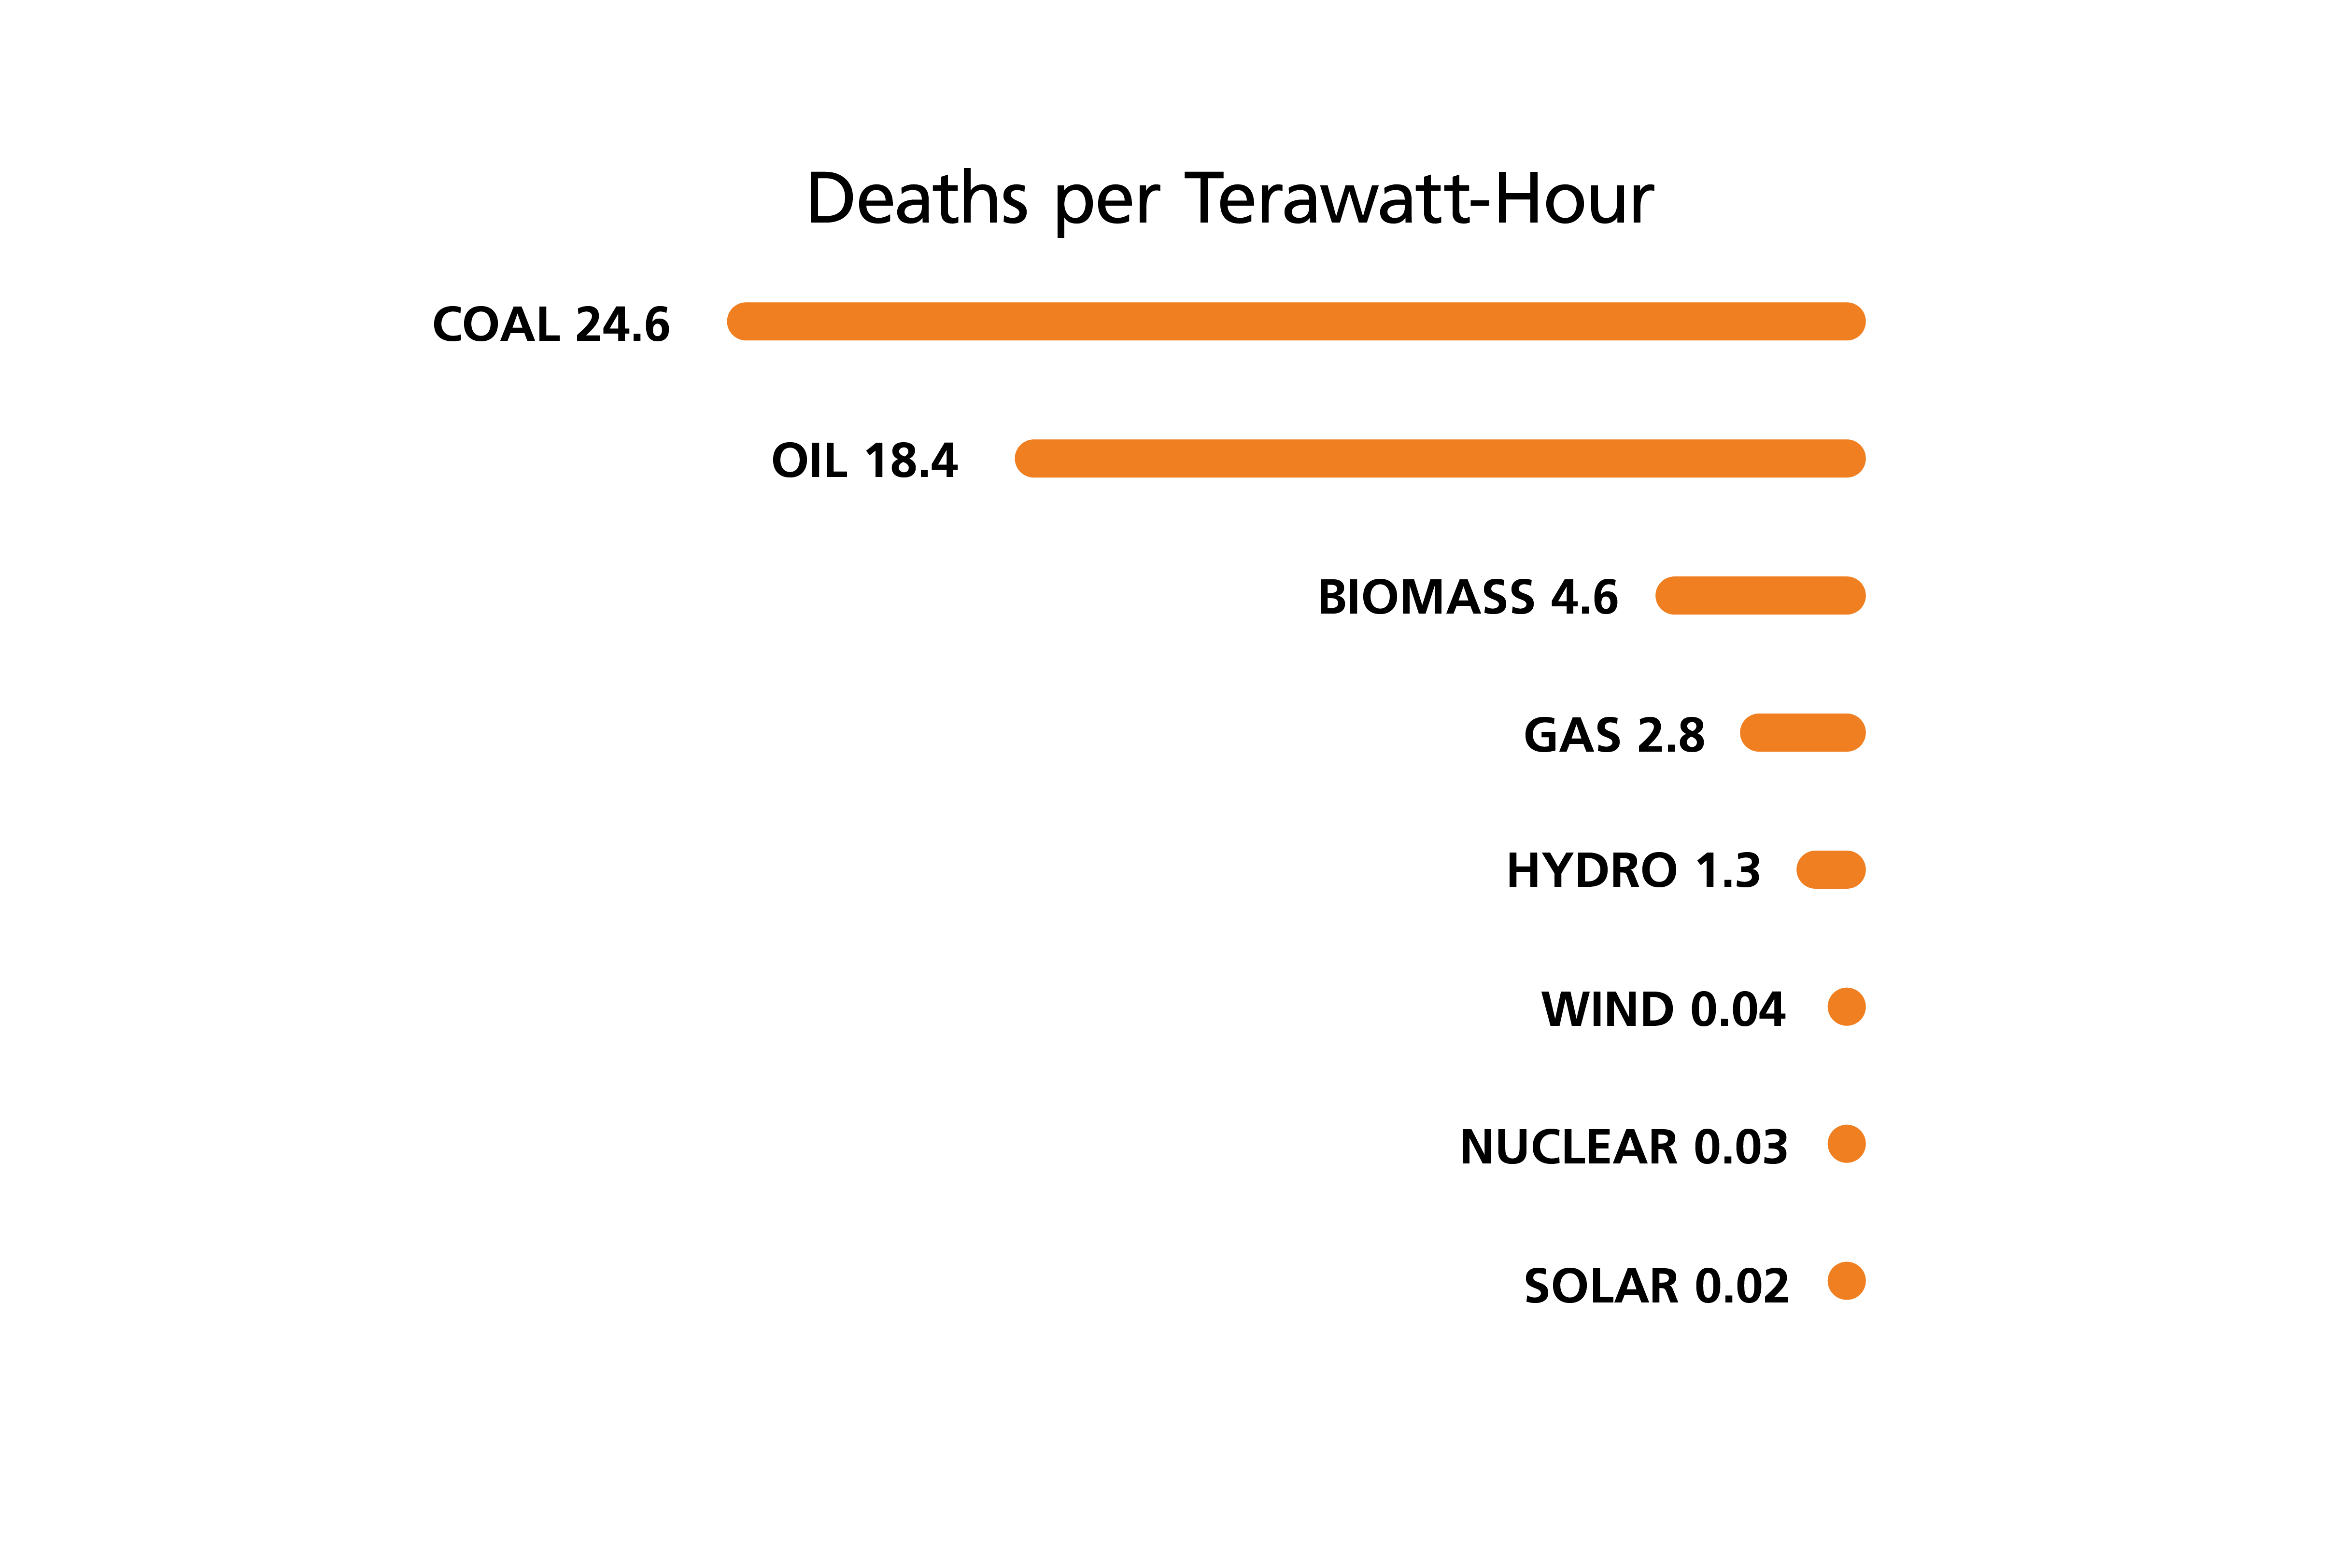 A bar graph of deaths per terawatt-hour that shows the most deaths from coal and the least from solar.